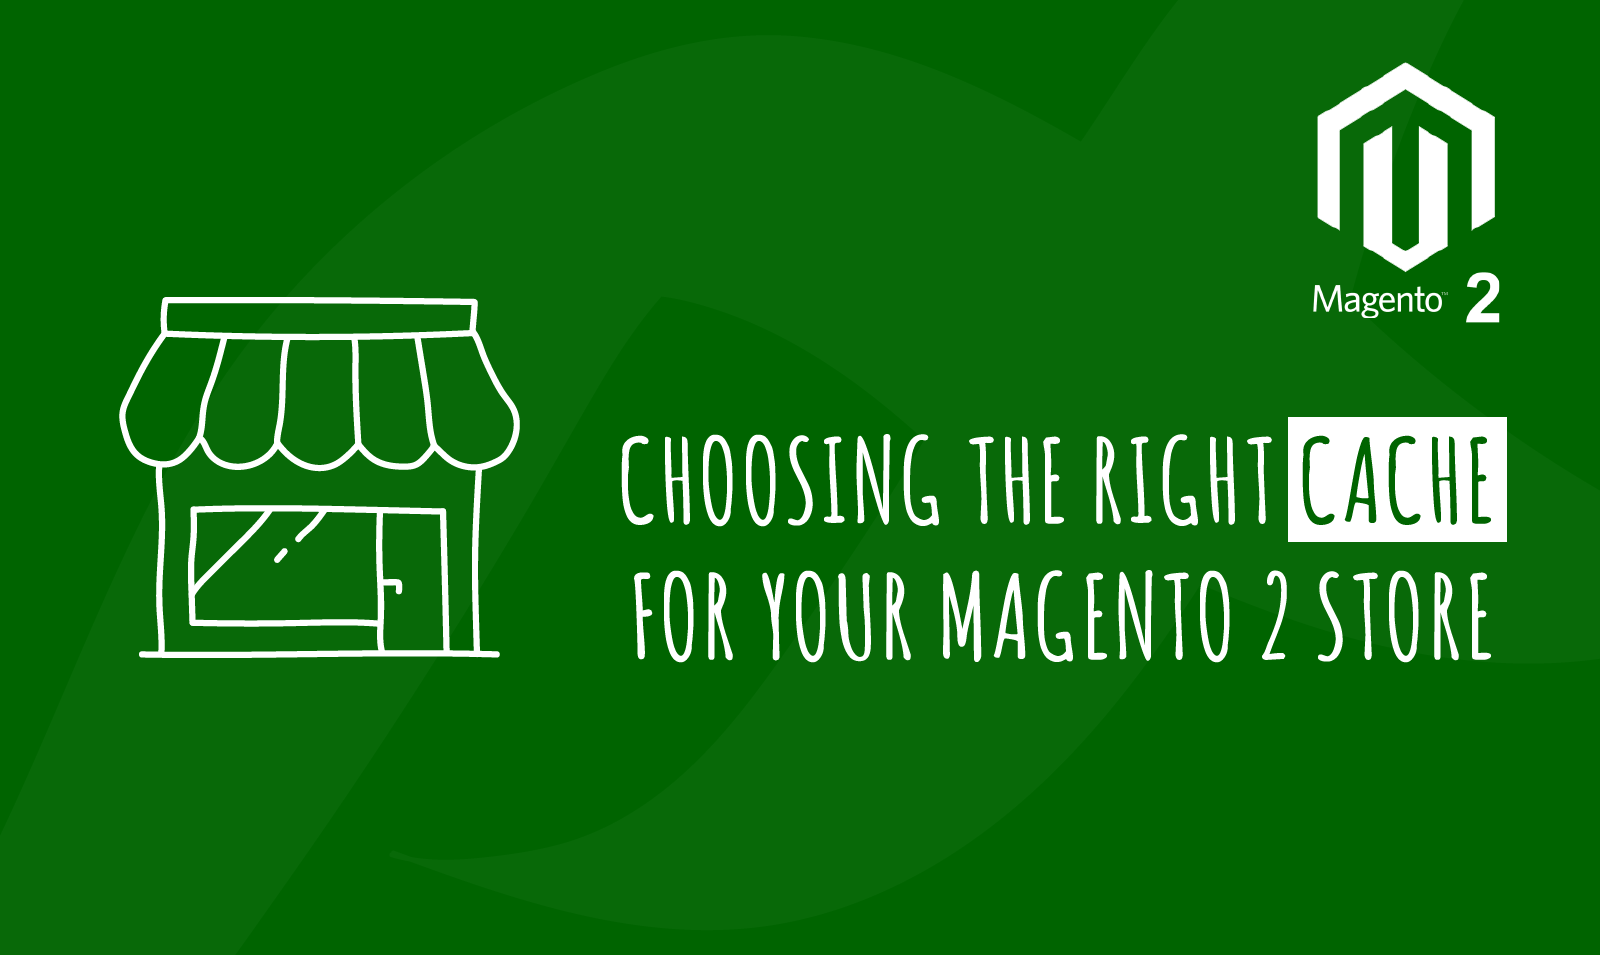 CHOOSING THE RIGHT CACHE FOR YOUR MAGENTO 2 STORE